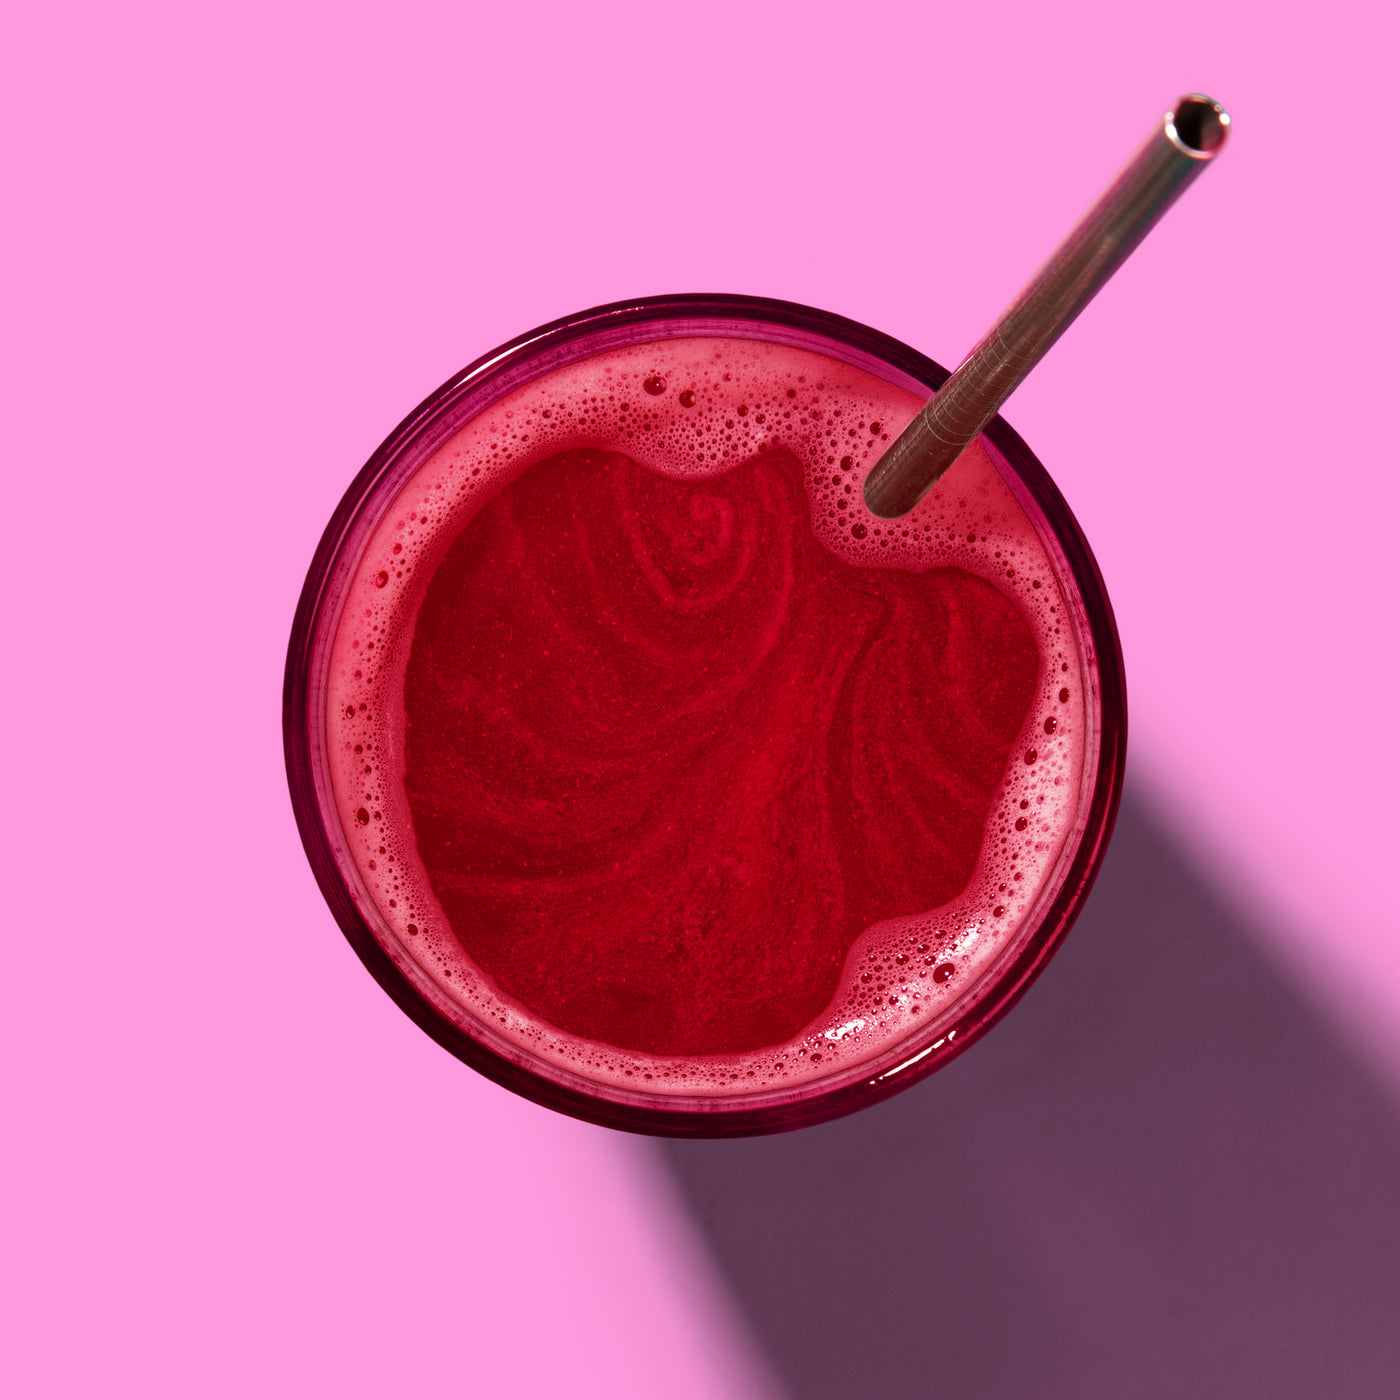 Time to Live it Up: Super Greens + Feel the Beet + Golden Hour